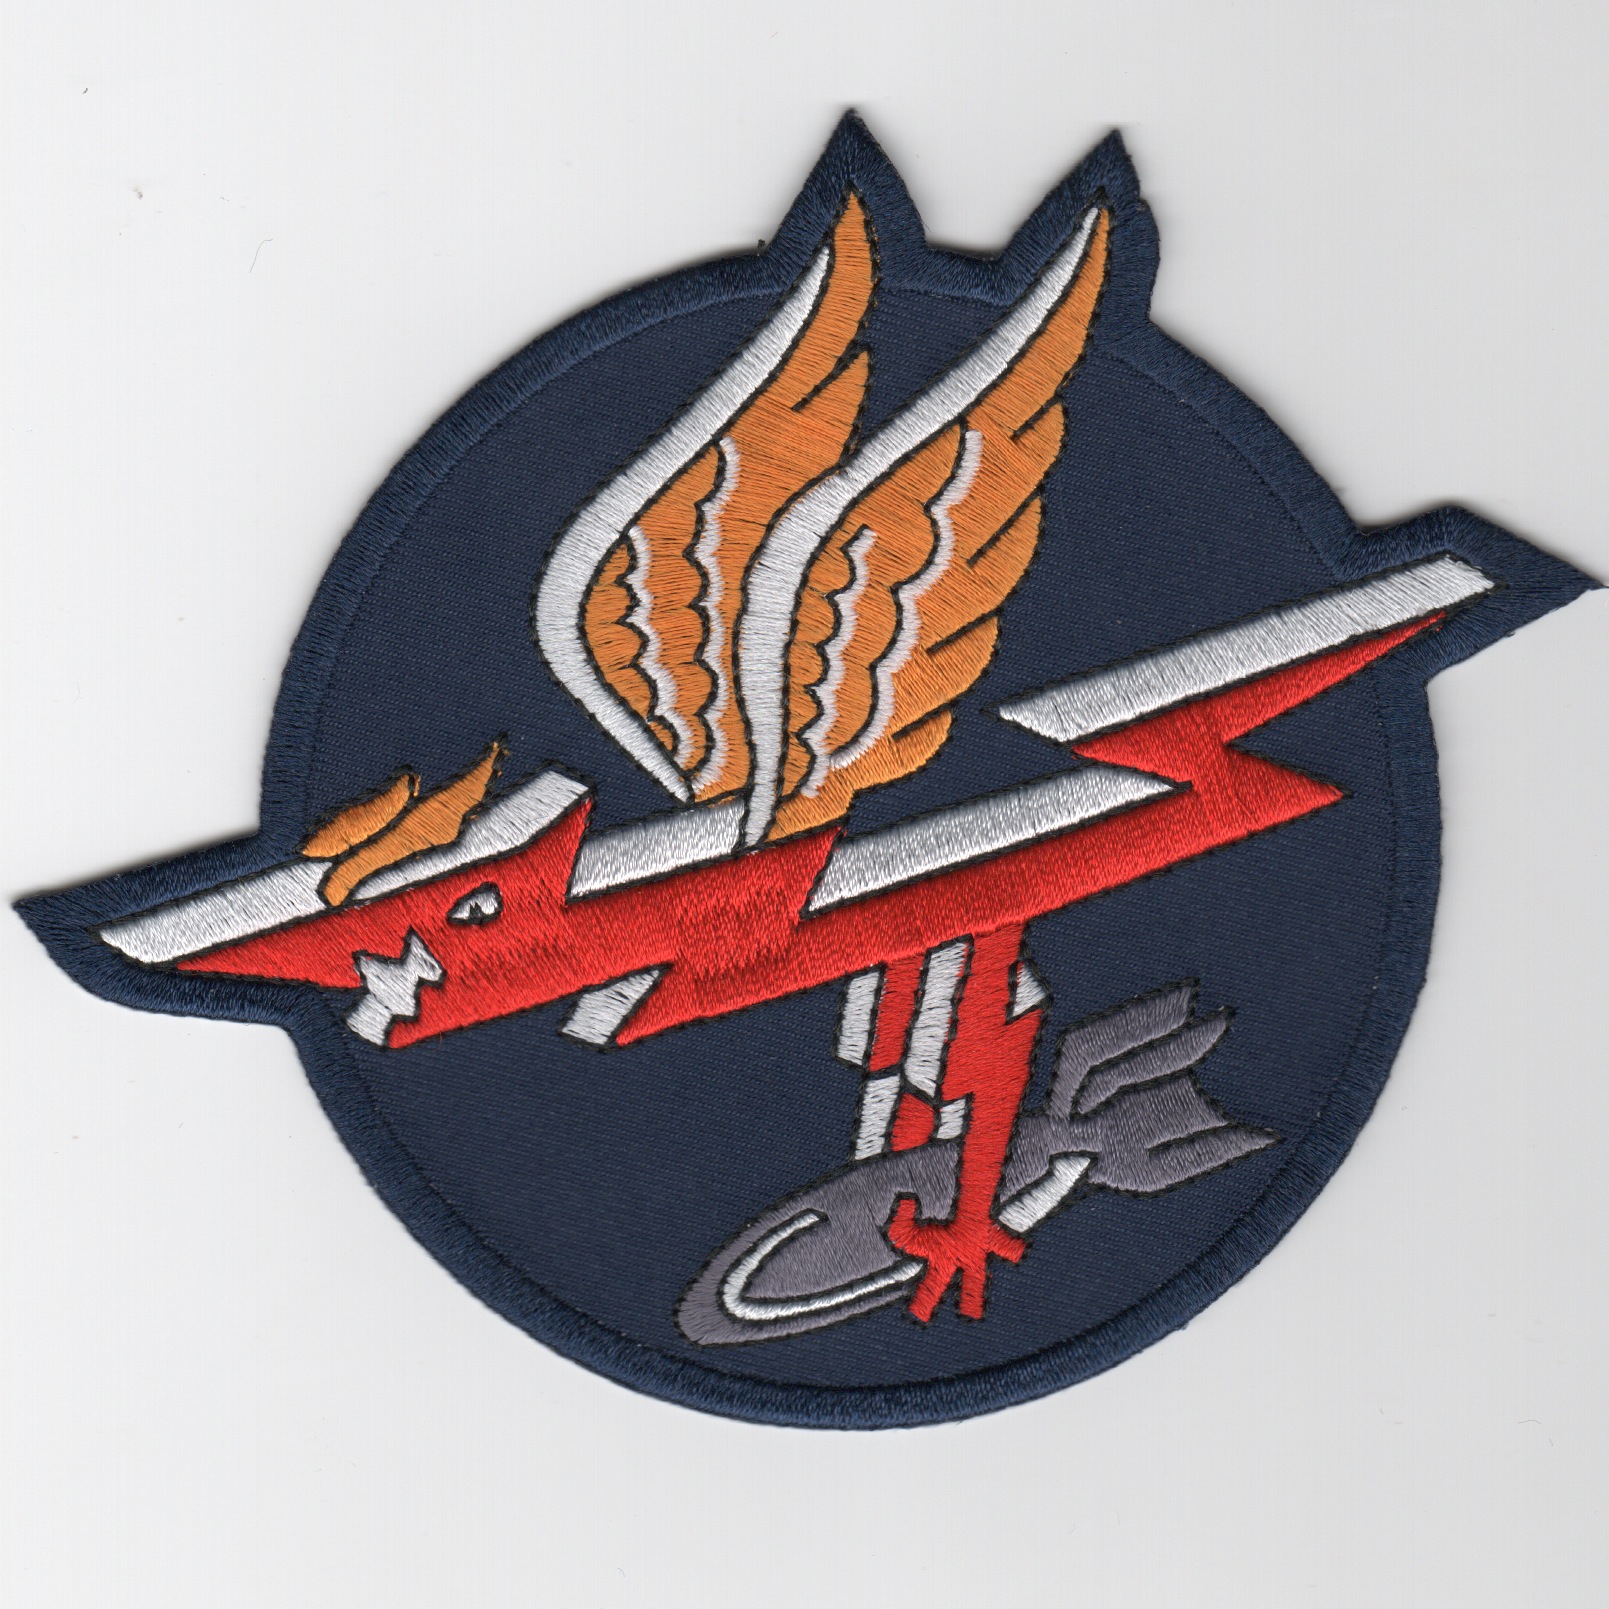 389th FS WWII Patch (Repro)